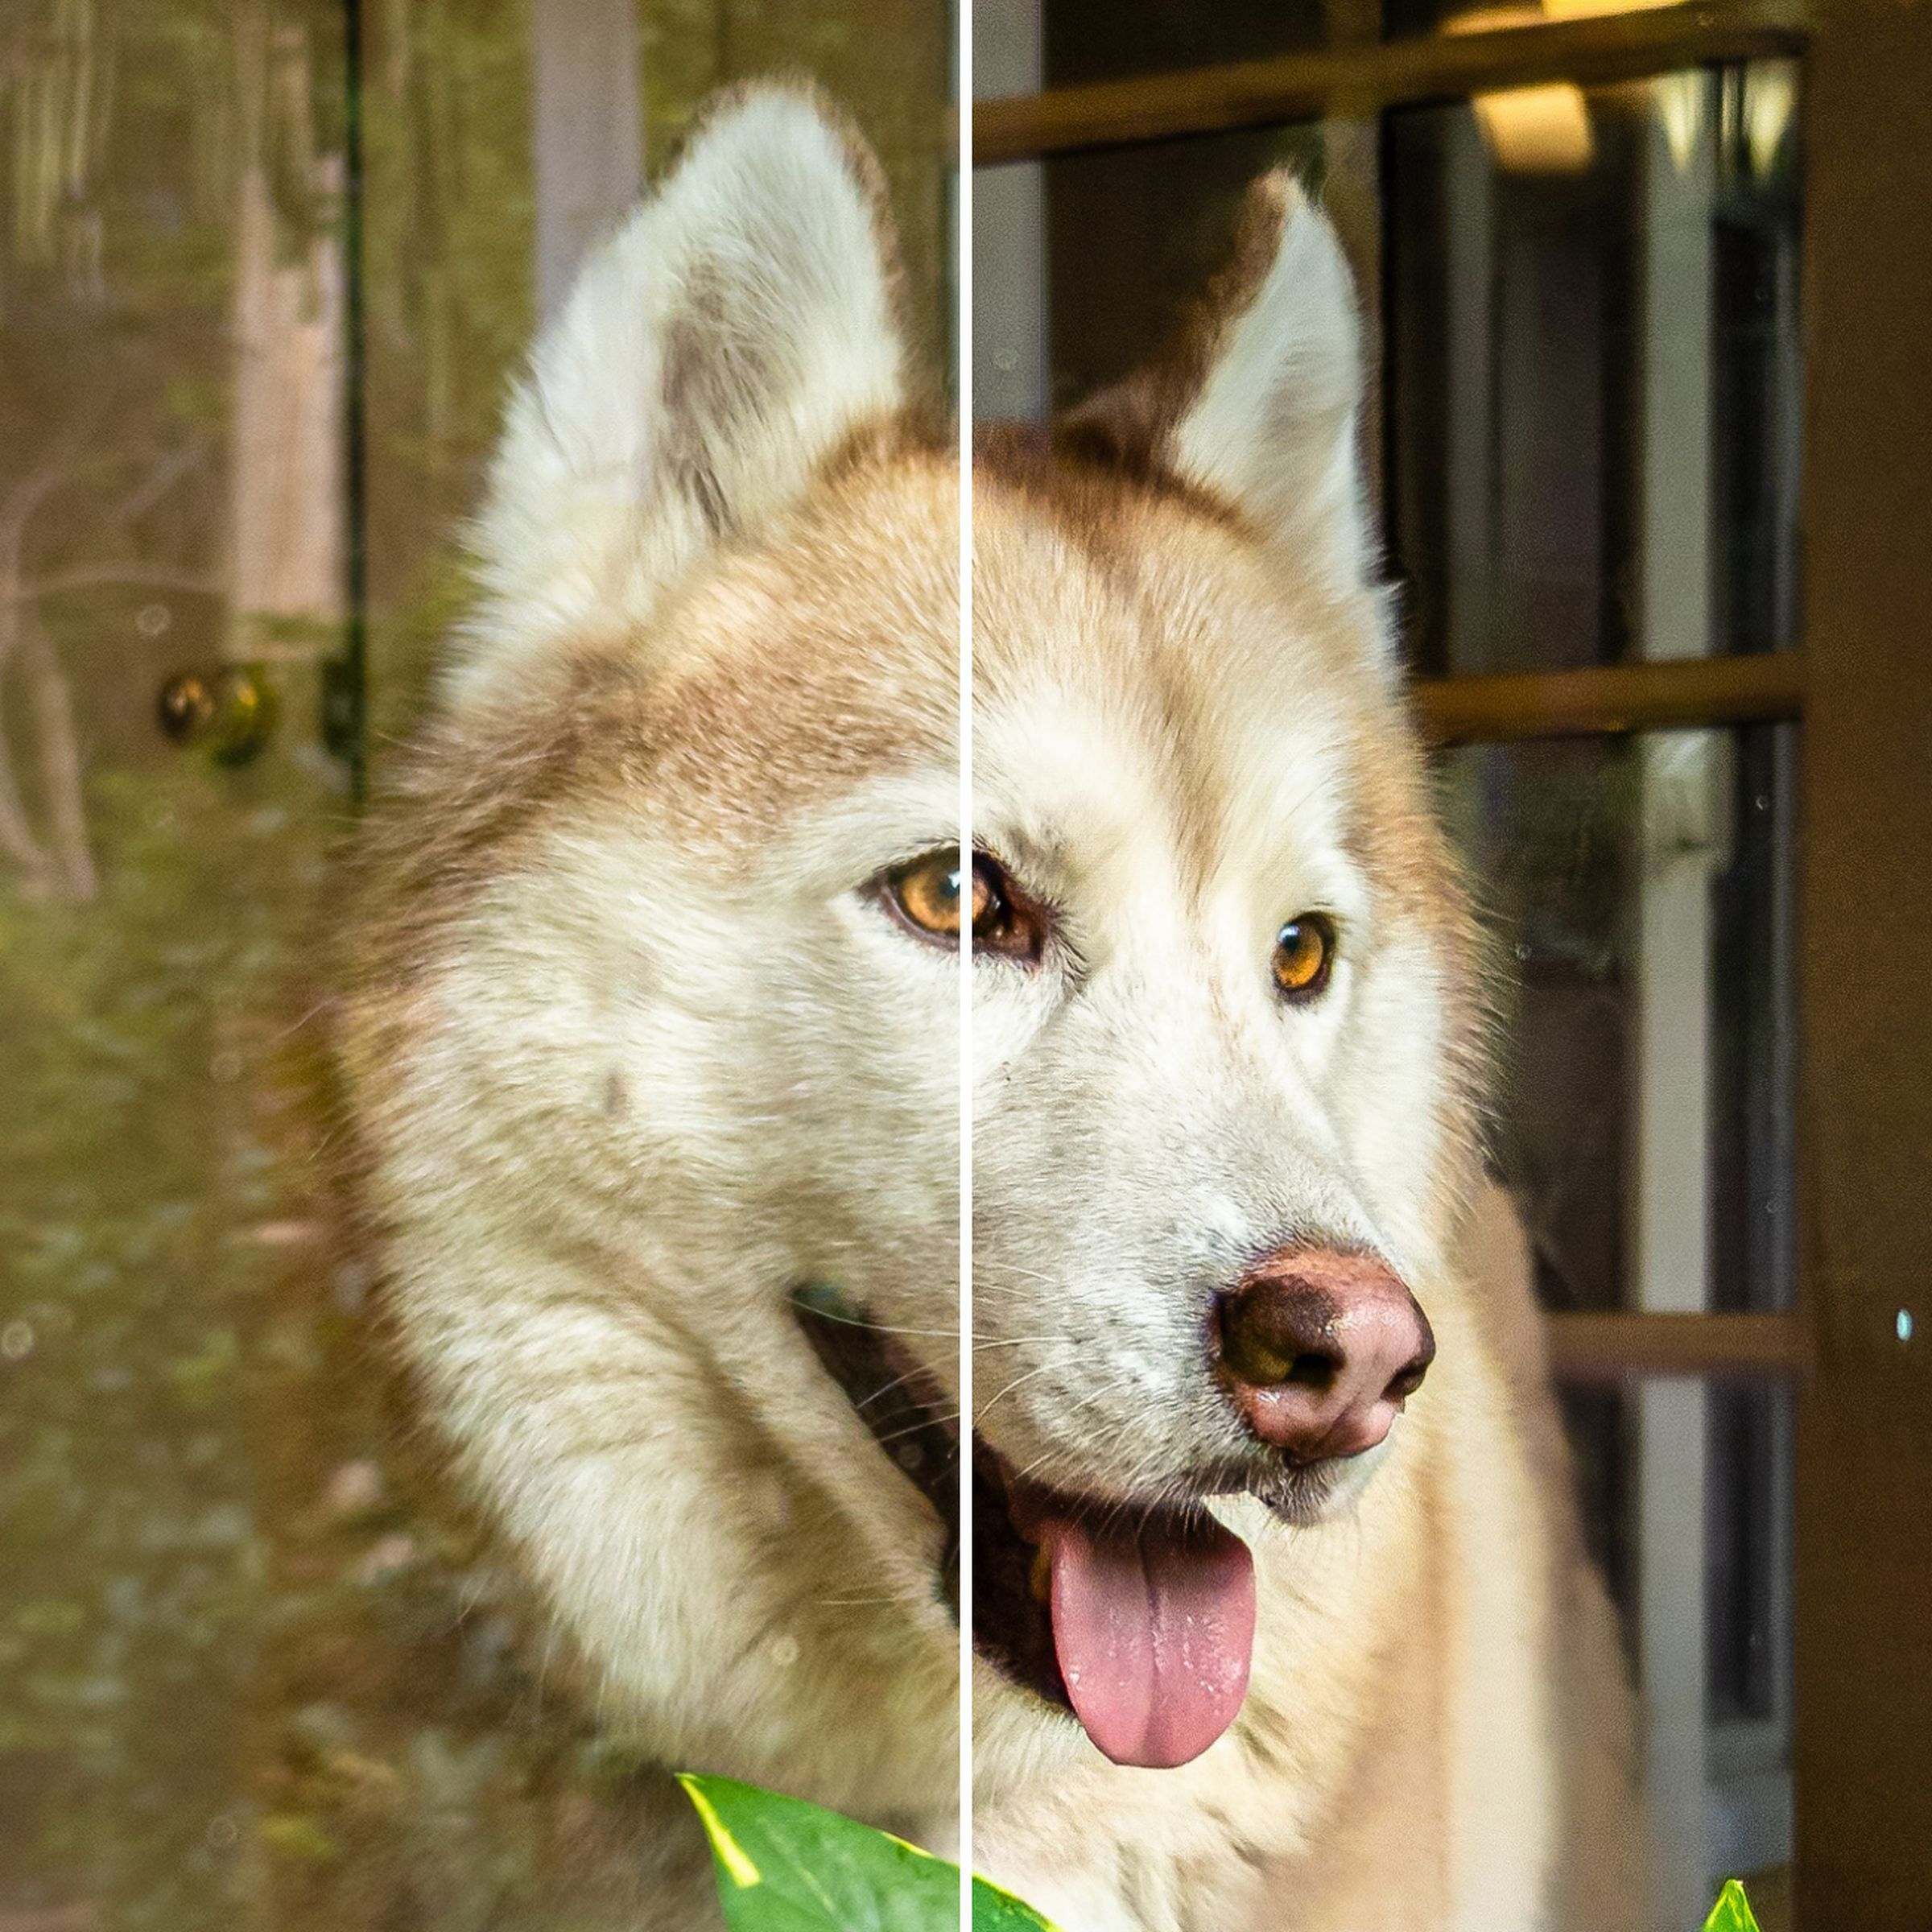 A husky image split into two sections to remove reflections from a window.